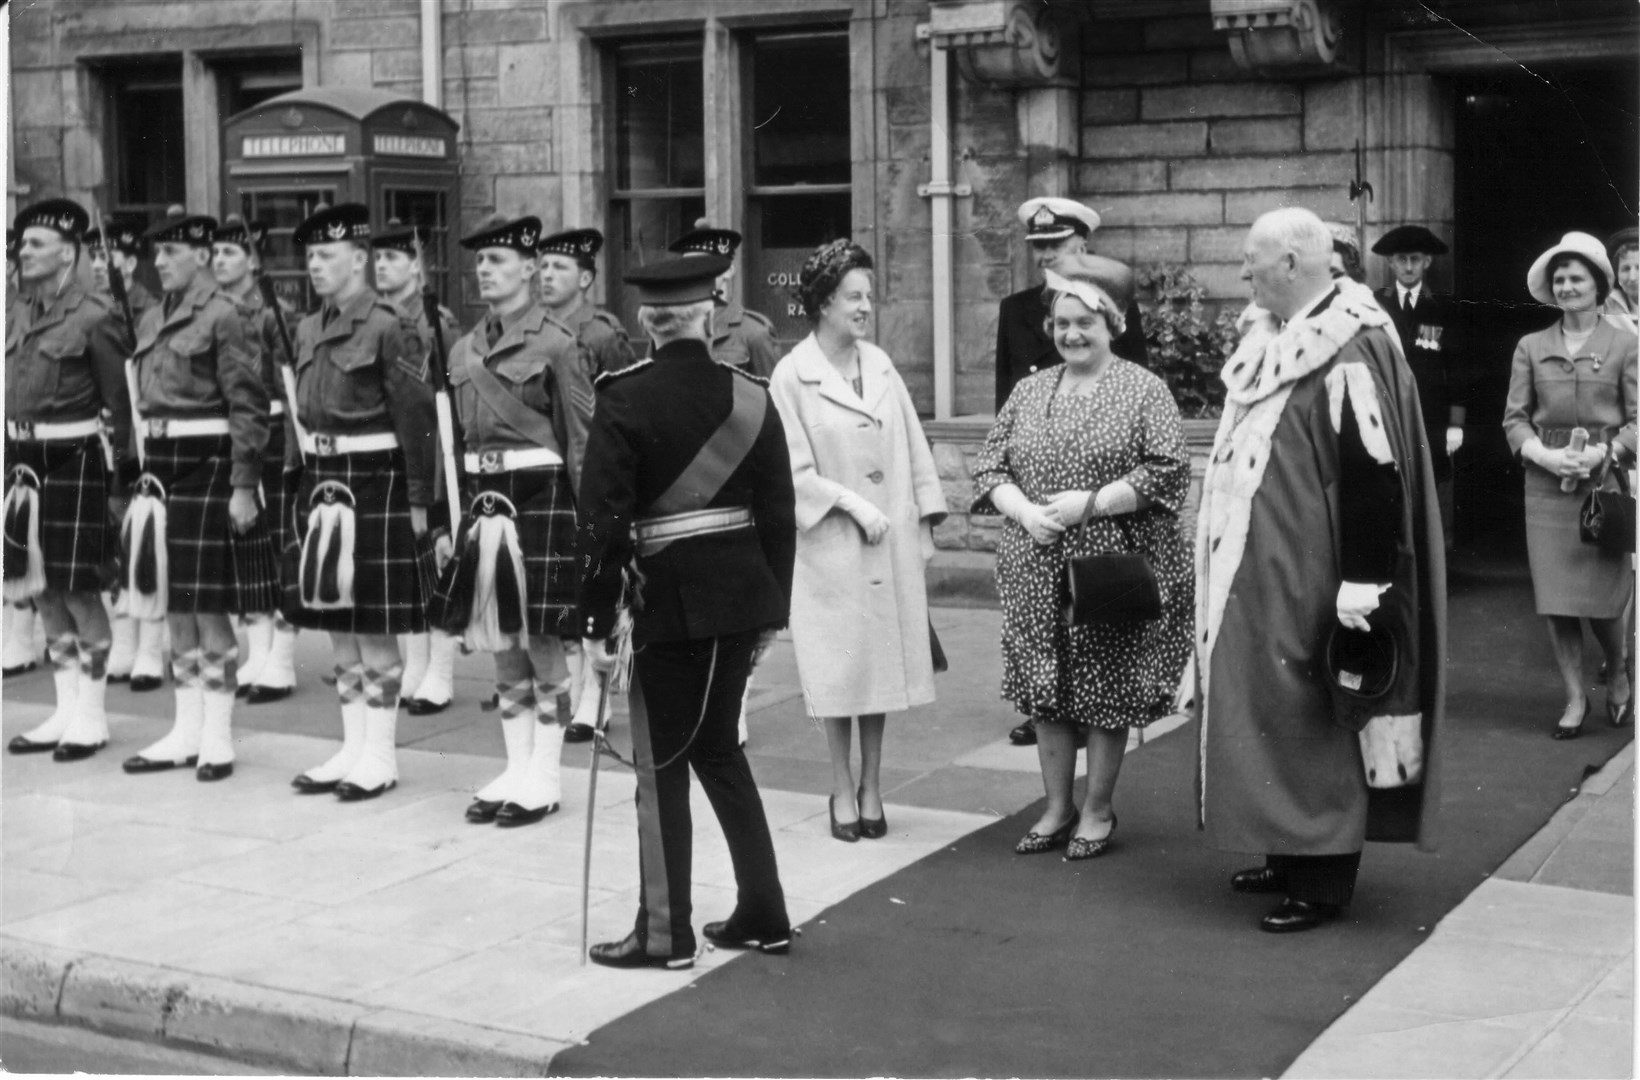 Provost Macrae and his wife Lily with the royal party in 1964.